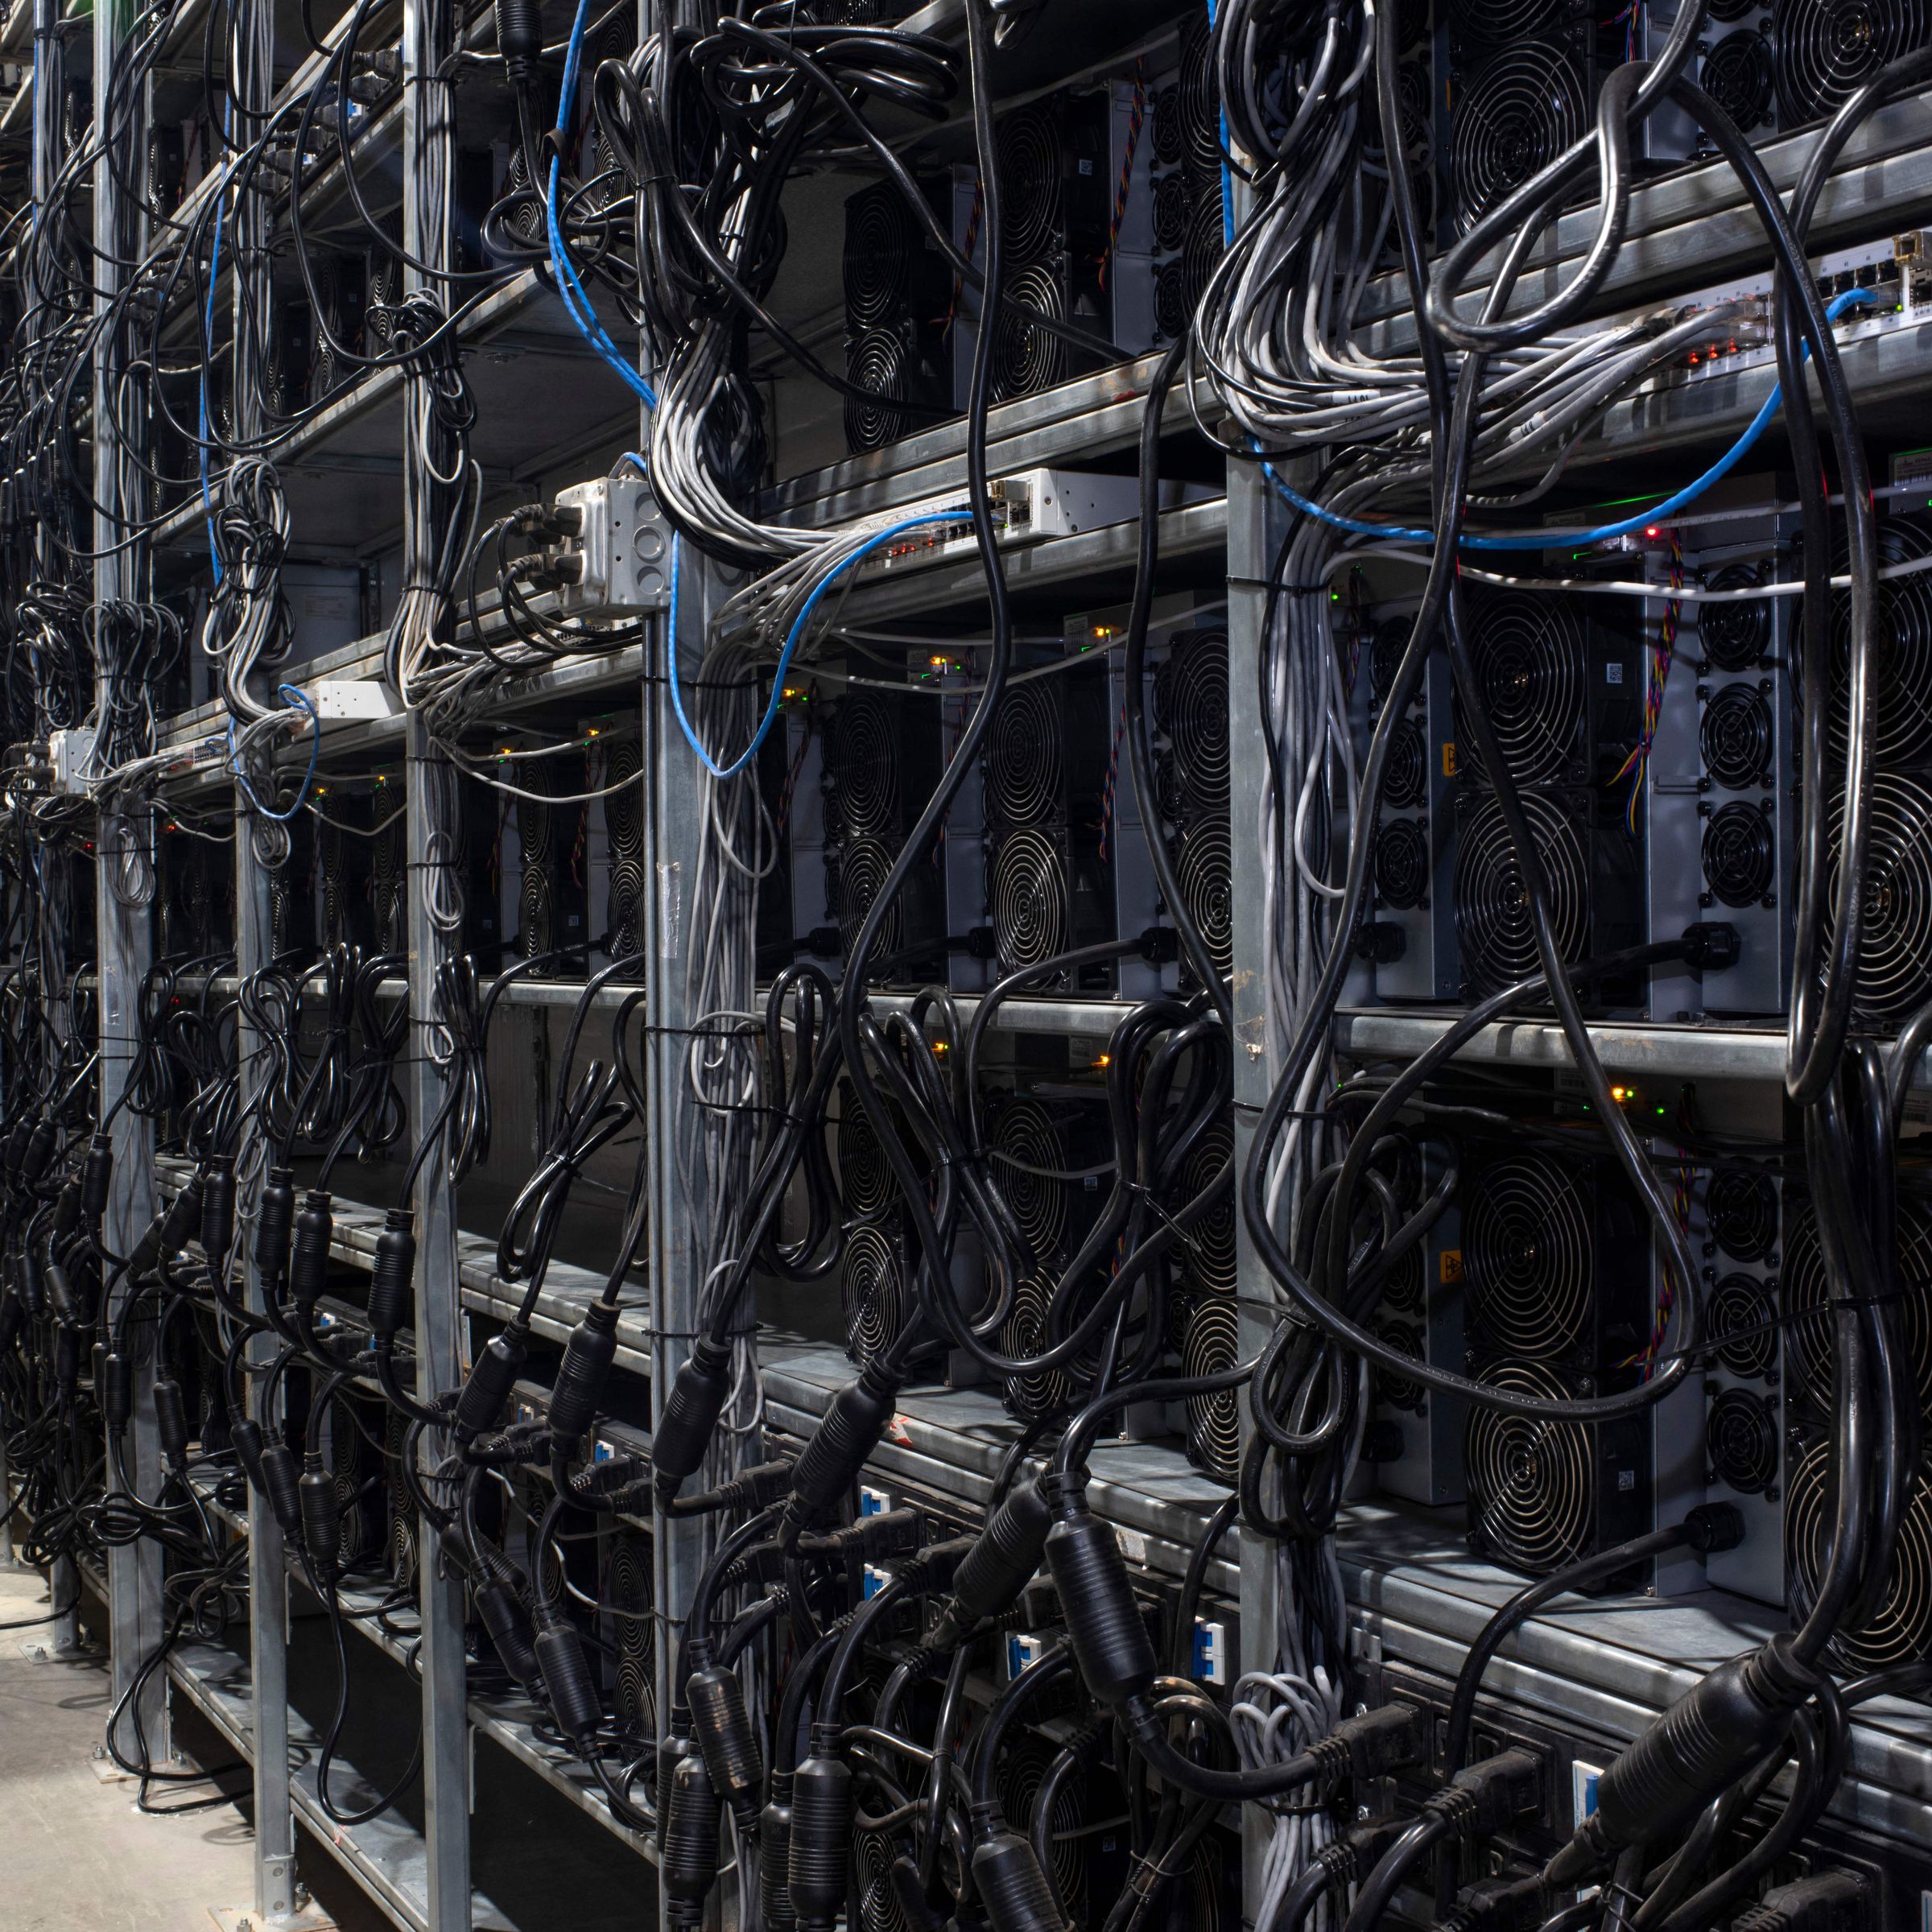 Racks of Bitcoin mining machines with wires hanging from them.